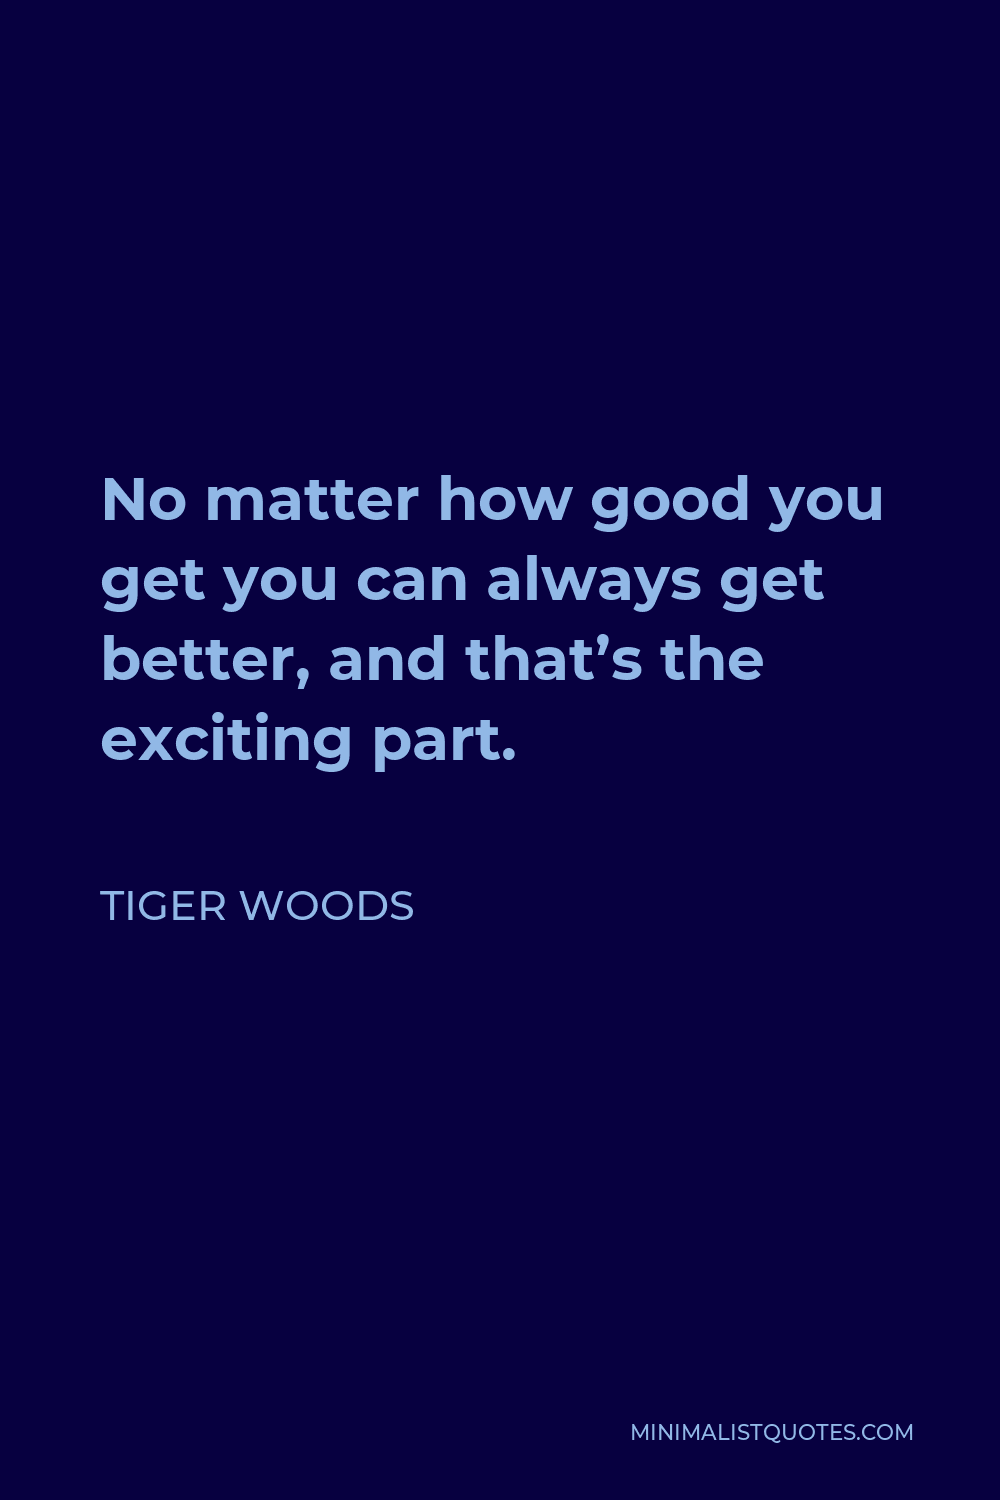 Tiger Woods Quote - No matter how good you get you can always get better, and that’s the exciting part.